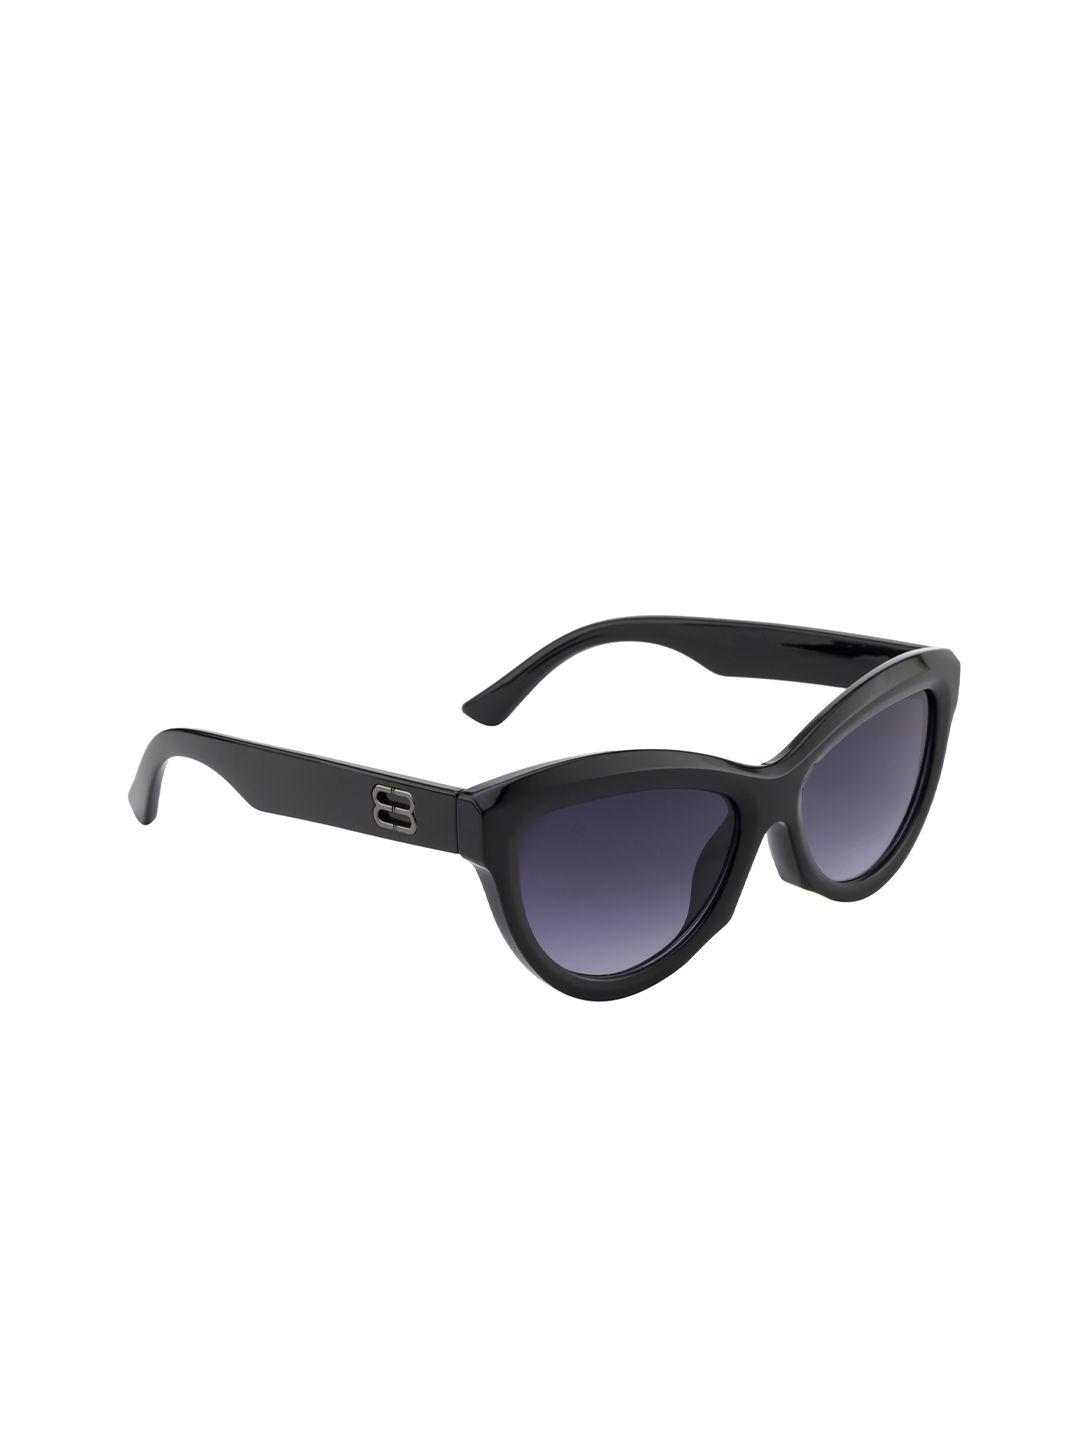 dressberry-women-cateye-sunglasses-with-uv-protected-lens-m23191